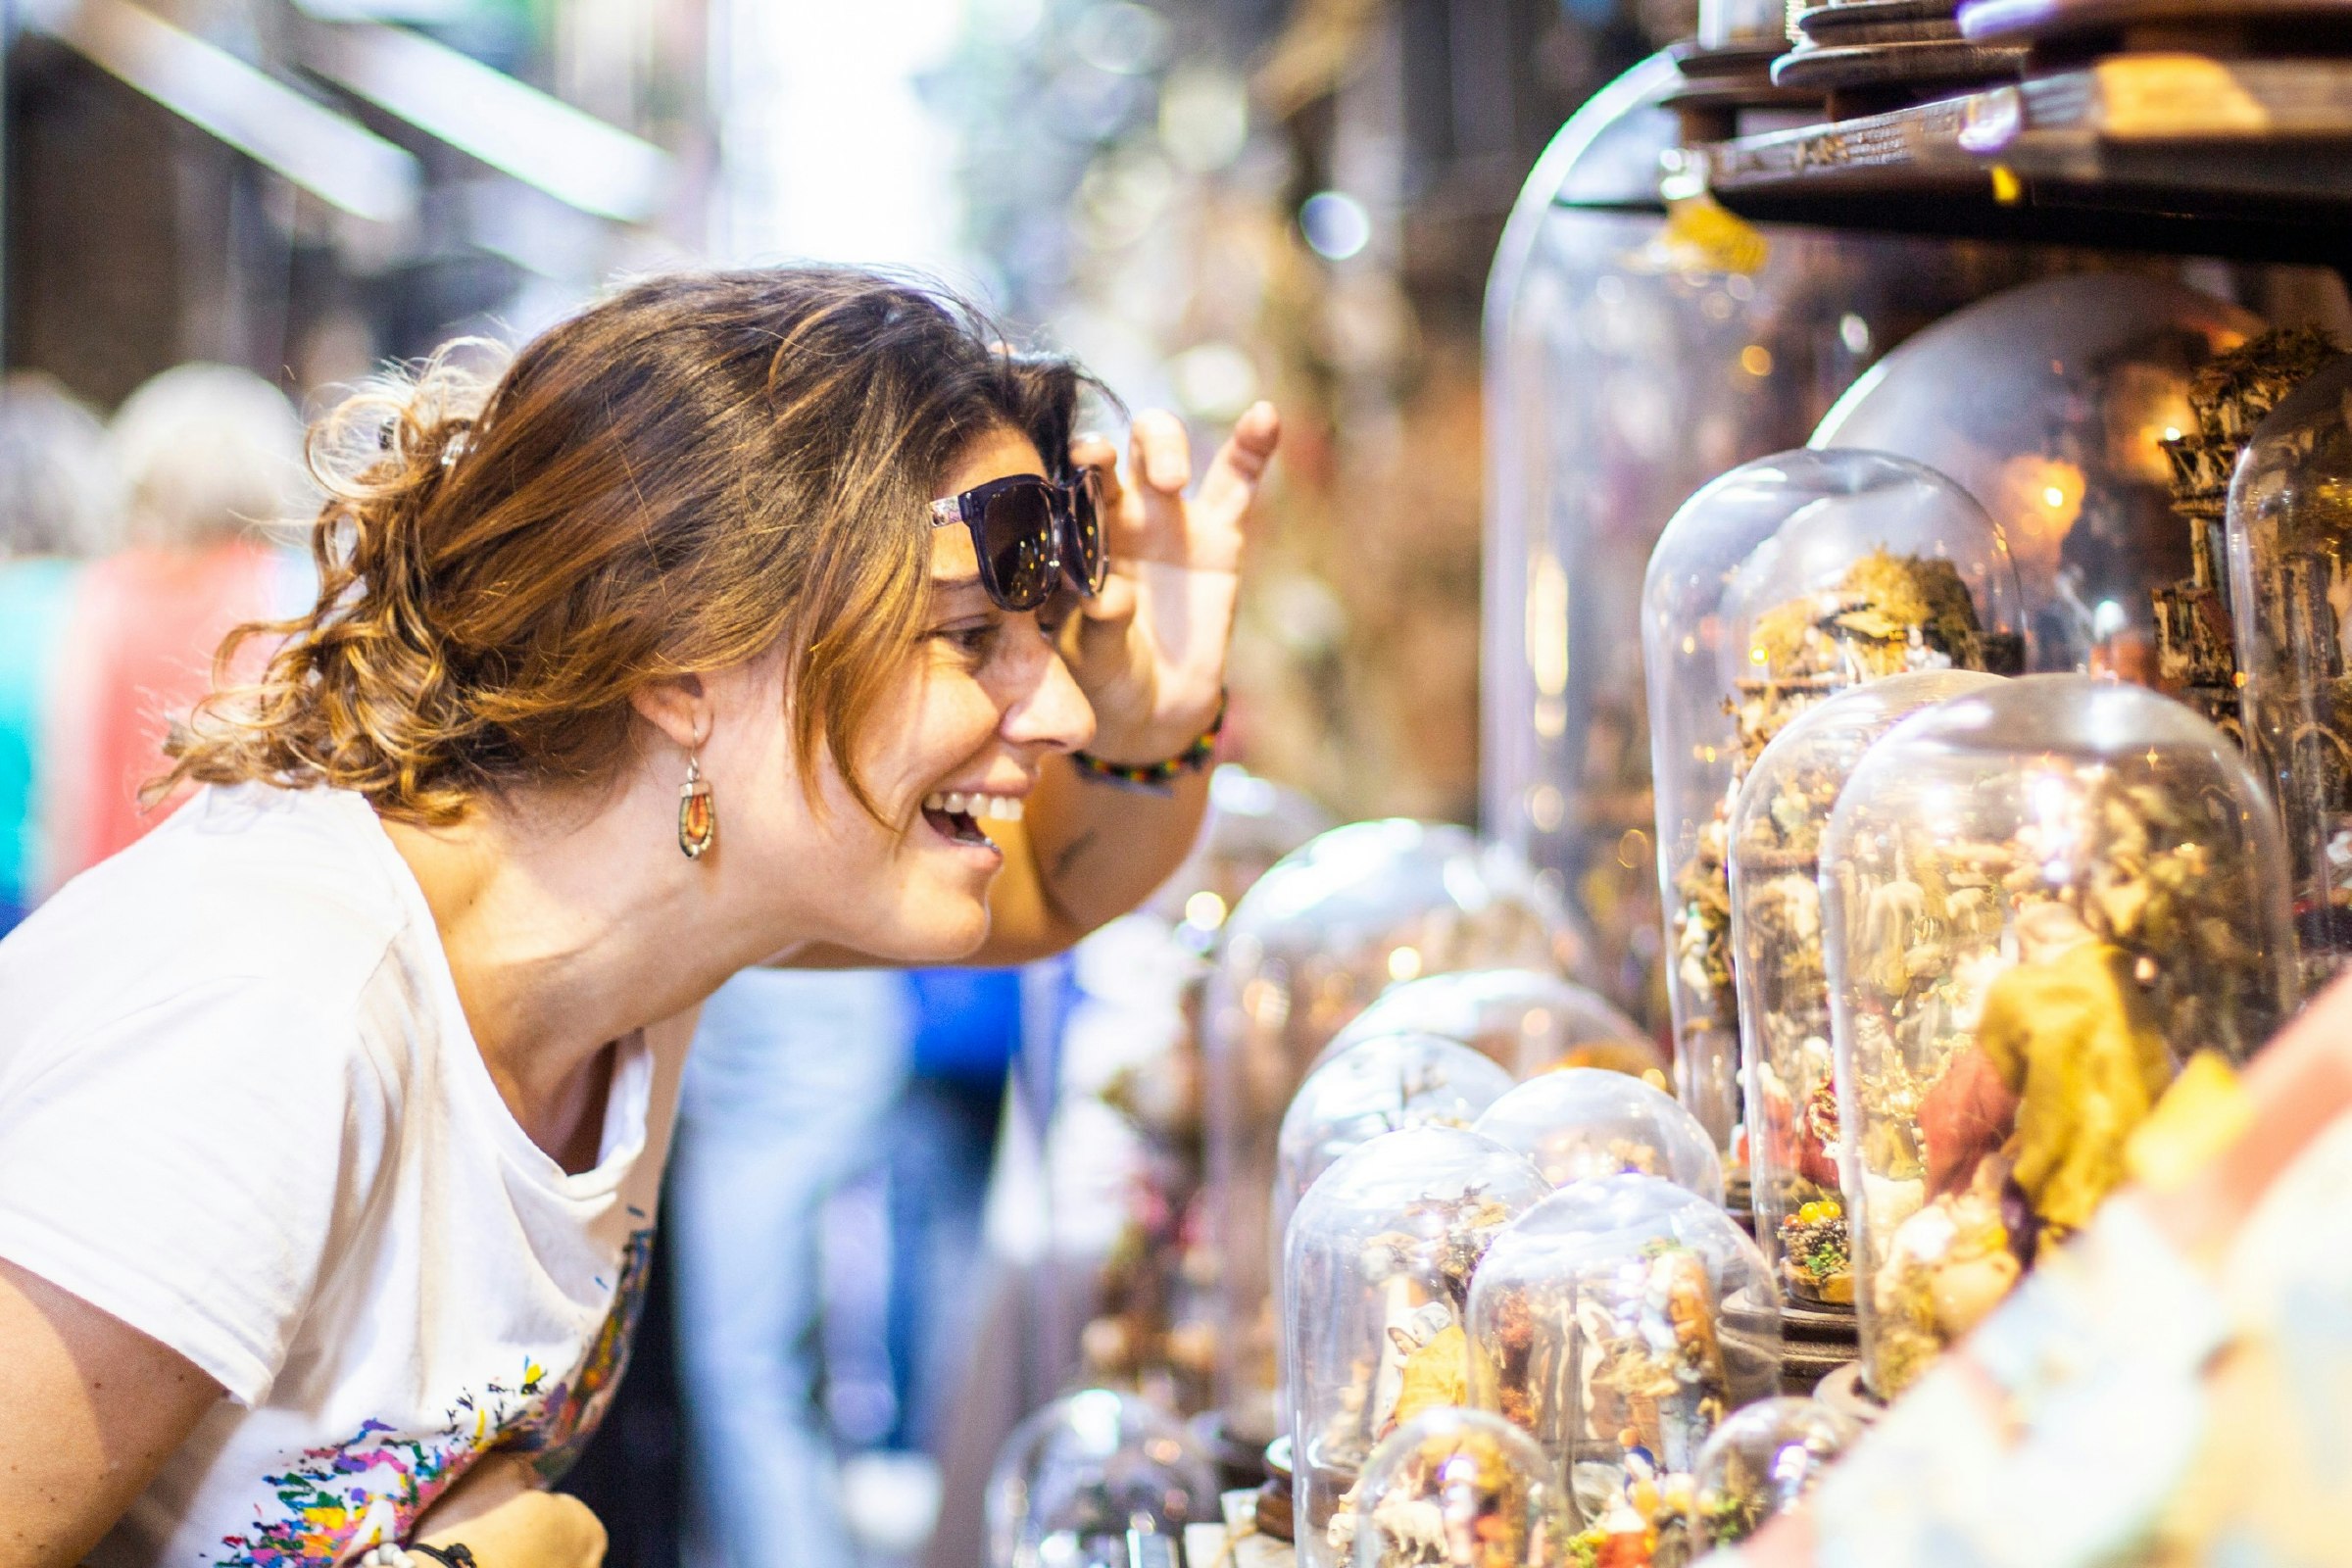 Smiling woman looking at glass-domed items at a street market in Naples.